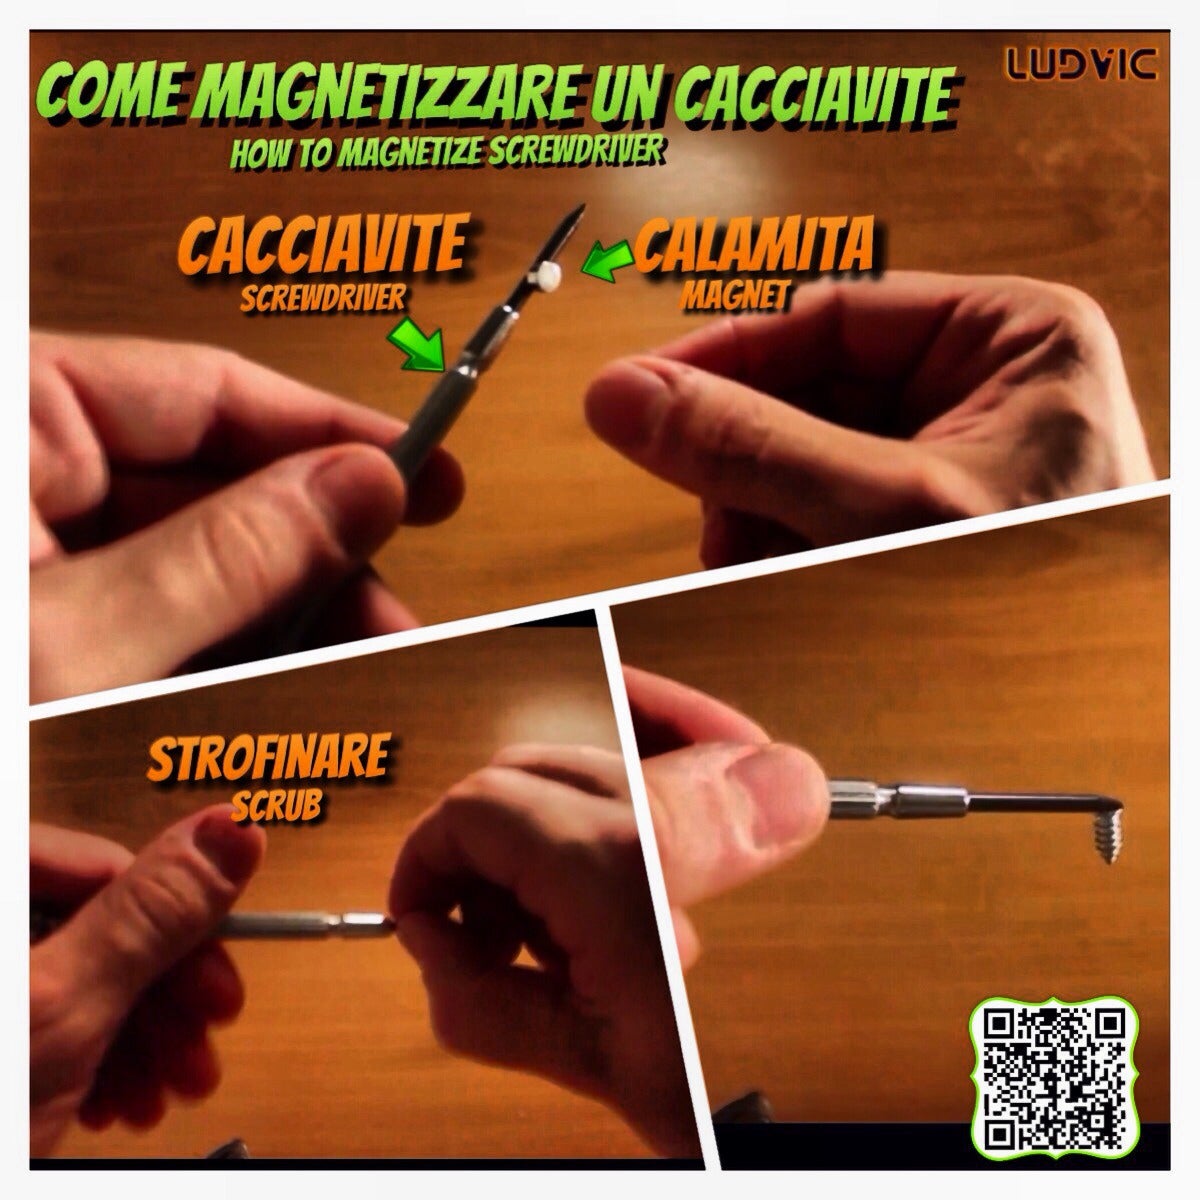 How to Magnetize a Screwdriver